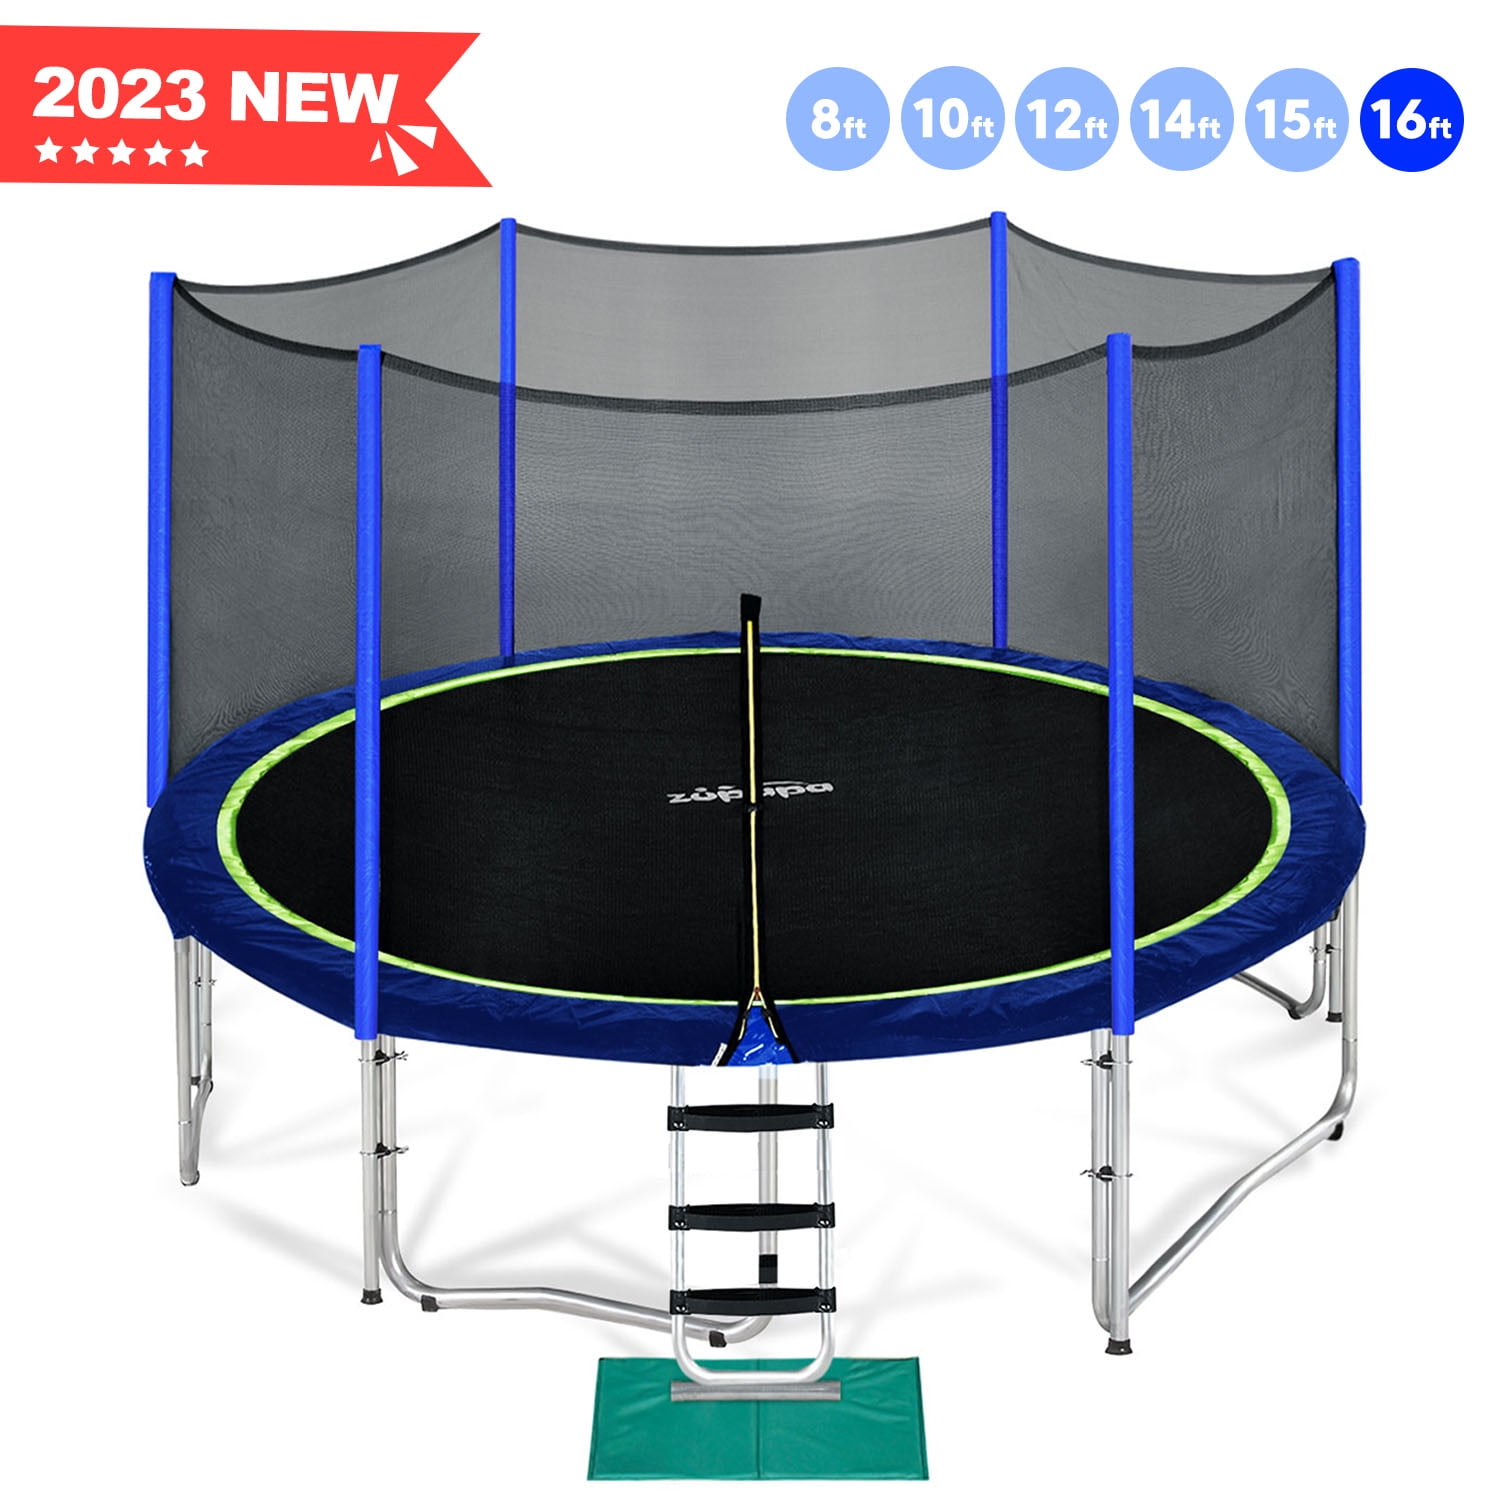 Zupapa No-Gap Design 16 15 14 12 10 8FT Trampoline for with Safety Net 425LBS Weight Capacity Outdoor Backyards Trampolines with Ladder for Children Adults Family - Walmart.com